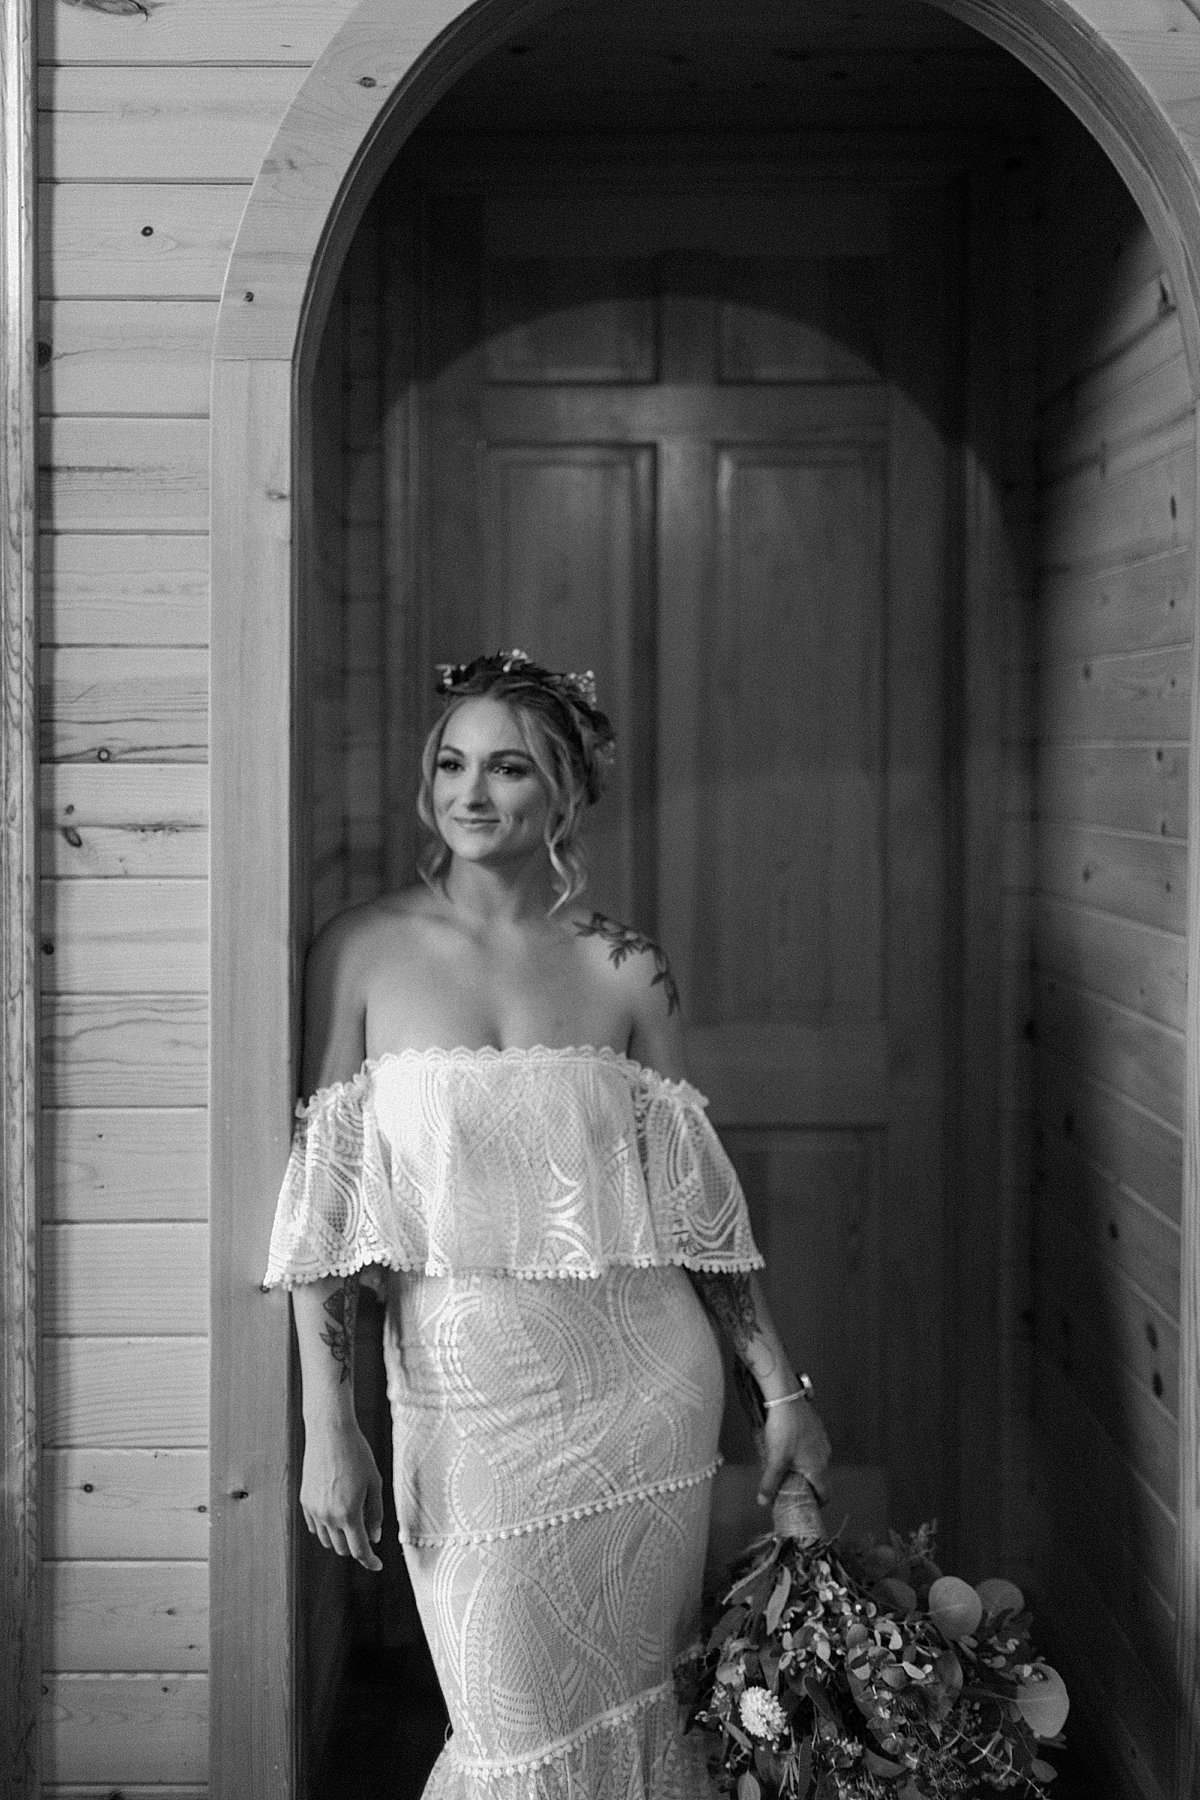  Portrait of Bride in doorway with off the shoulder wedding dress and floral headpiece by Lucy Bouman 